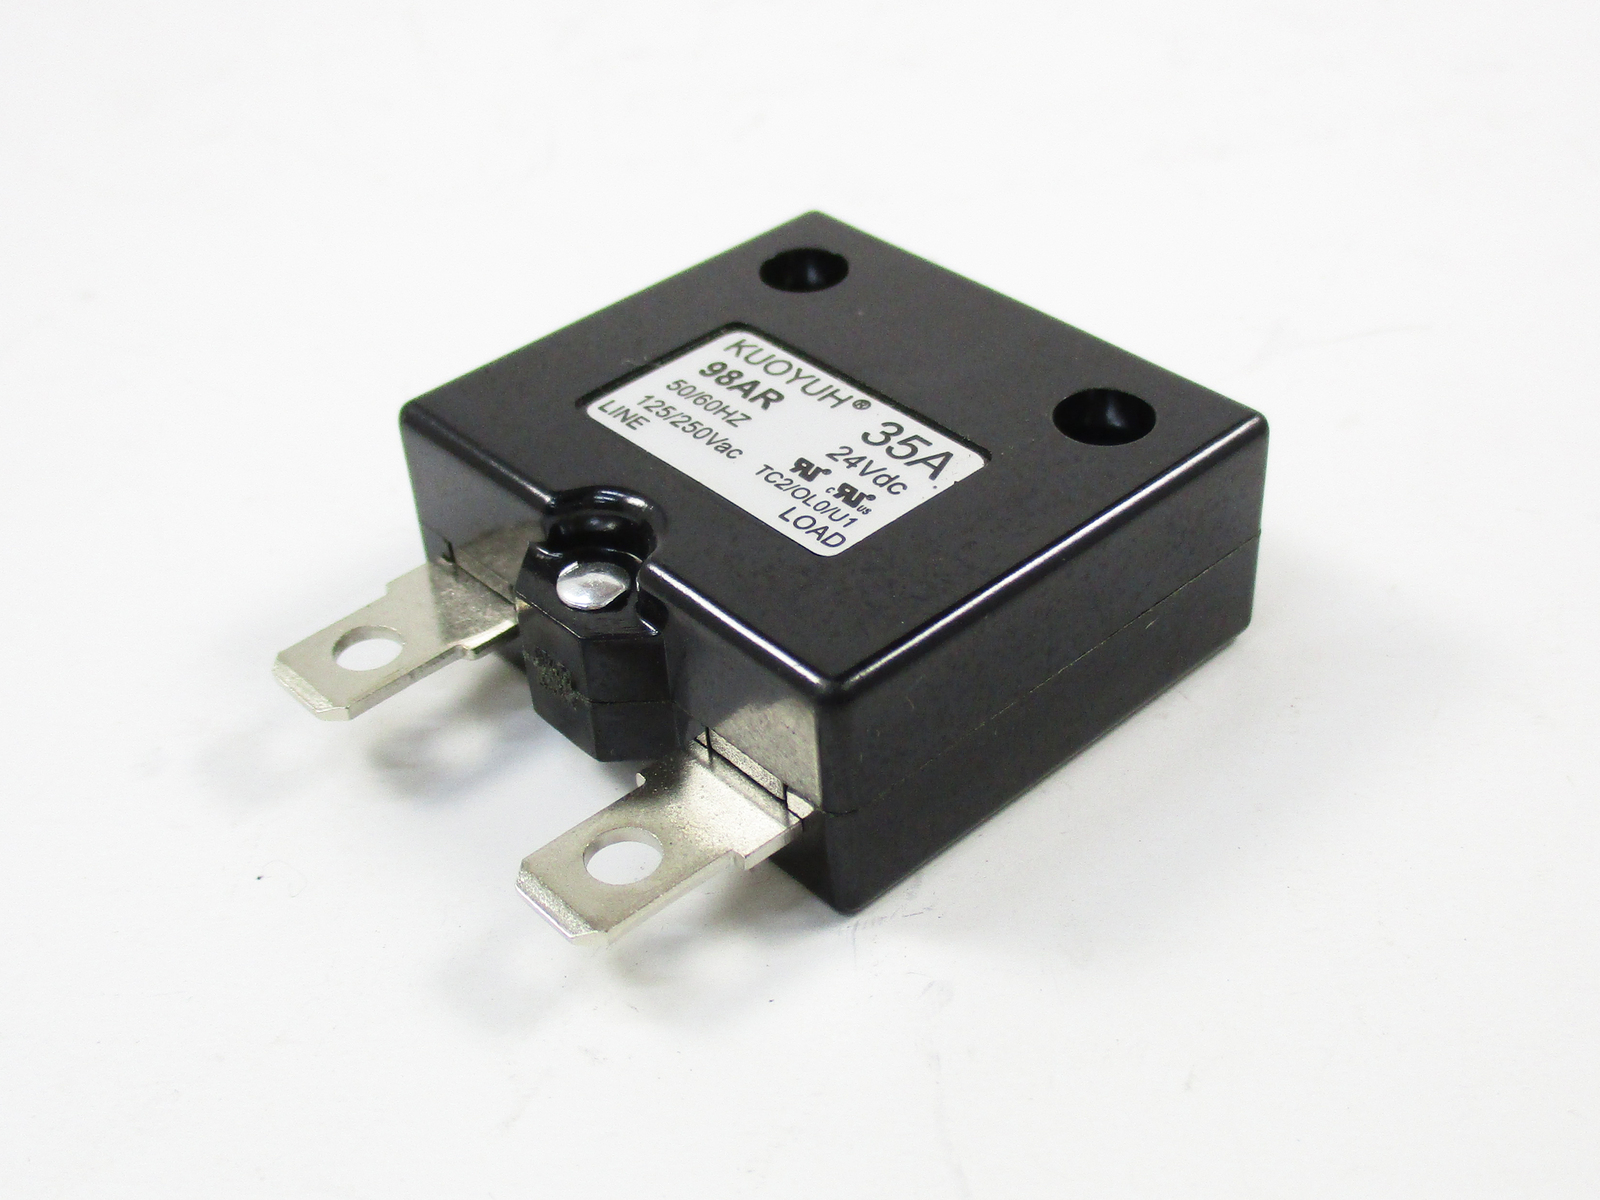 MSP CB35 -35A Circuit breaker mobility scooter parts reset switch over loading - $12.00